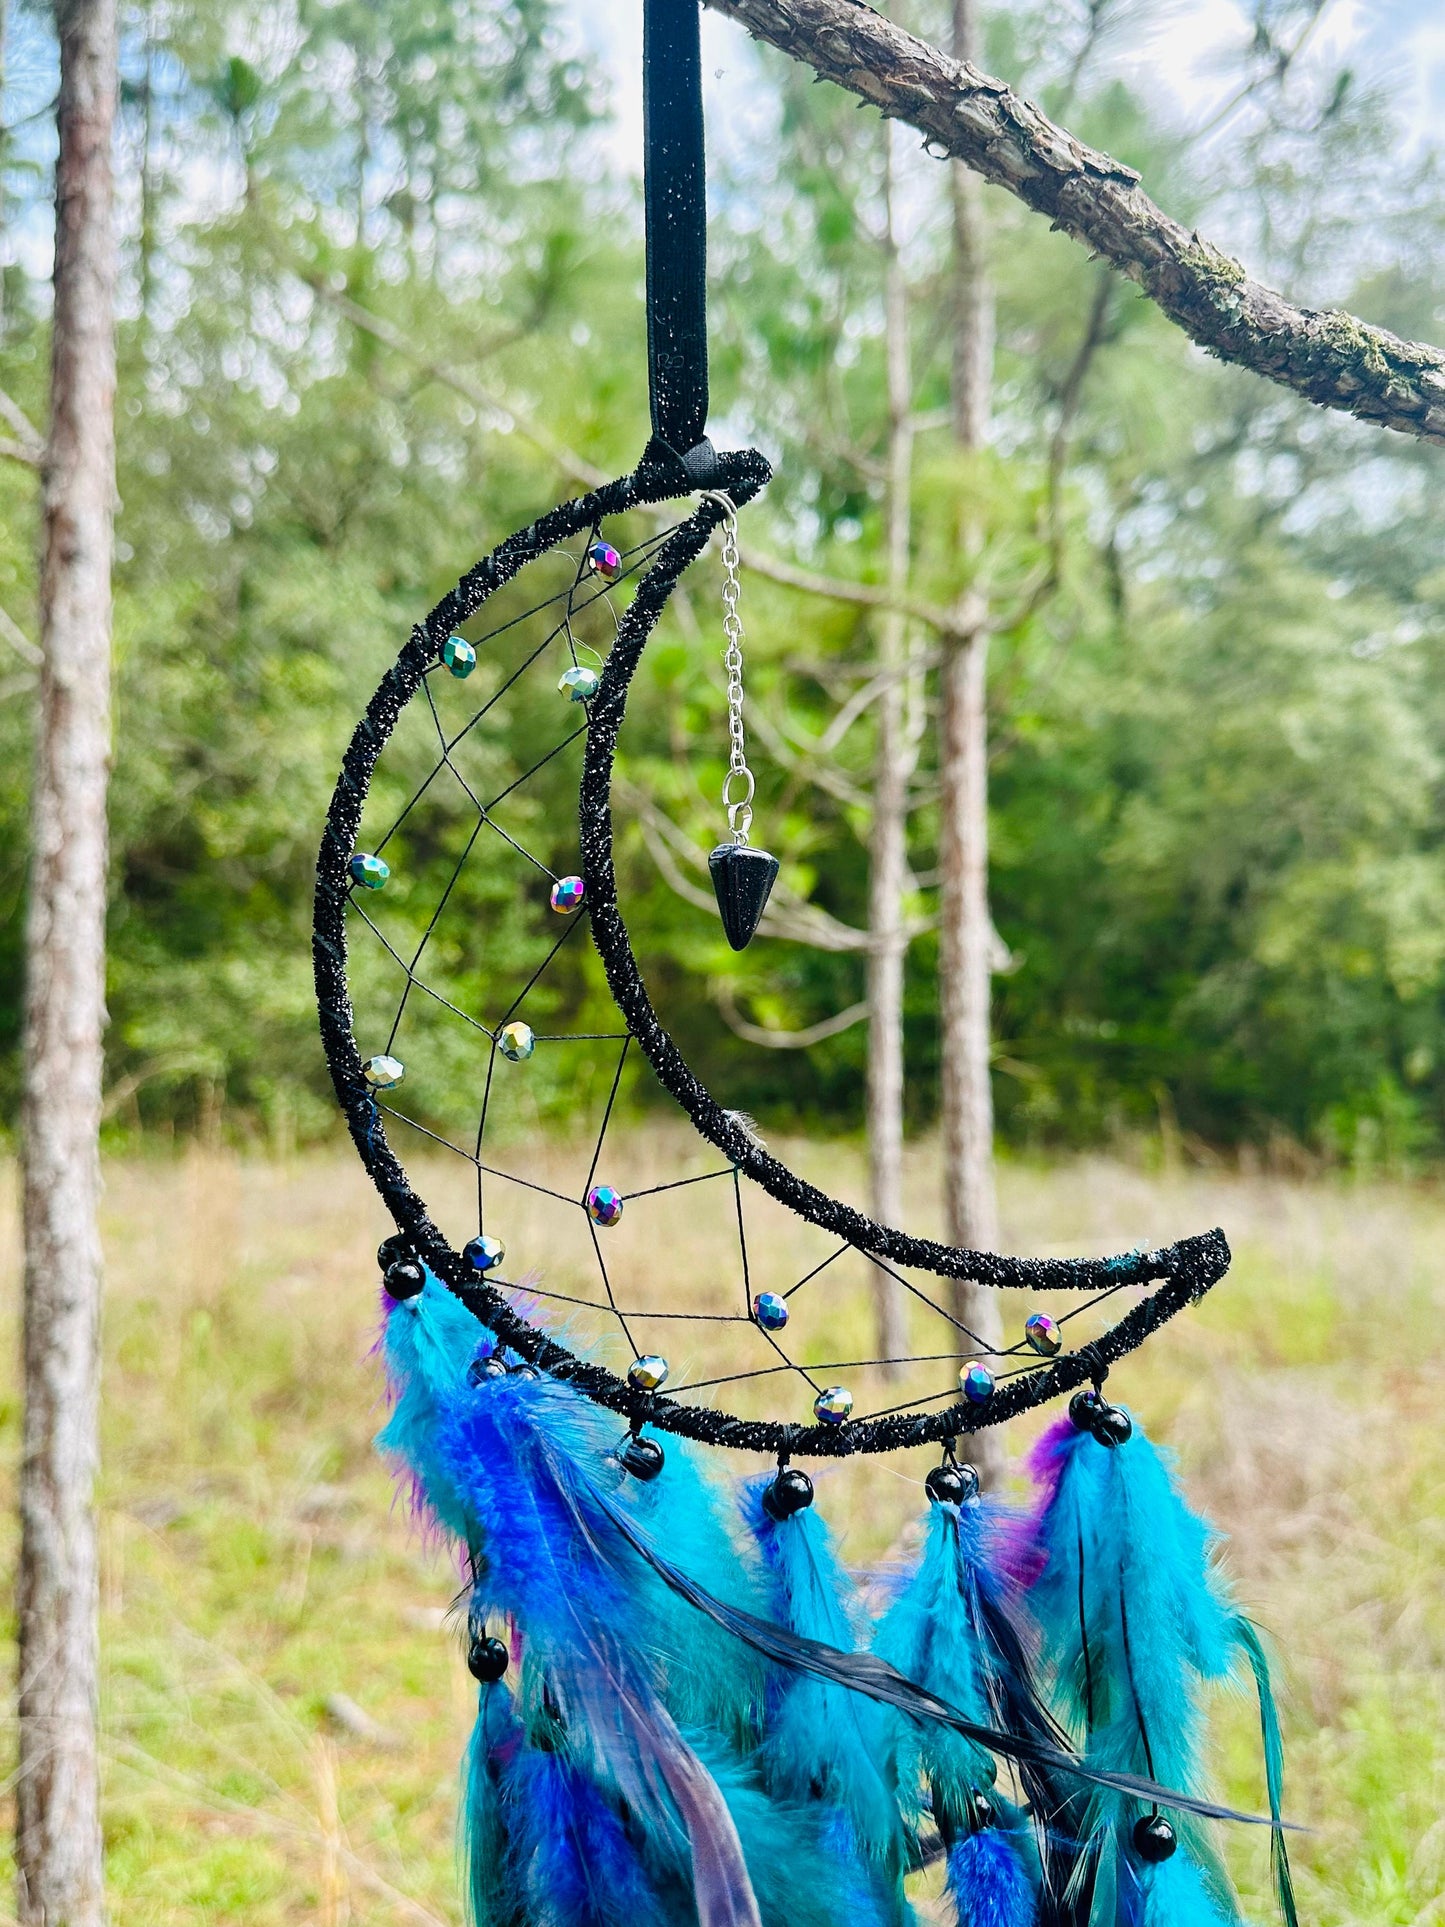 Medium Wall Hanging Crescent Moon Dream Catcher with Black Purple Green Blue Feathers and Charm, Modern Boho Style Home Decor -- Quick Ship!